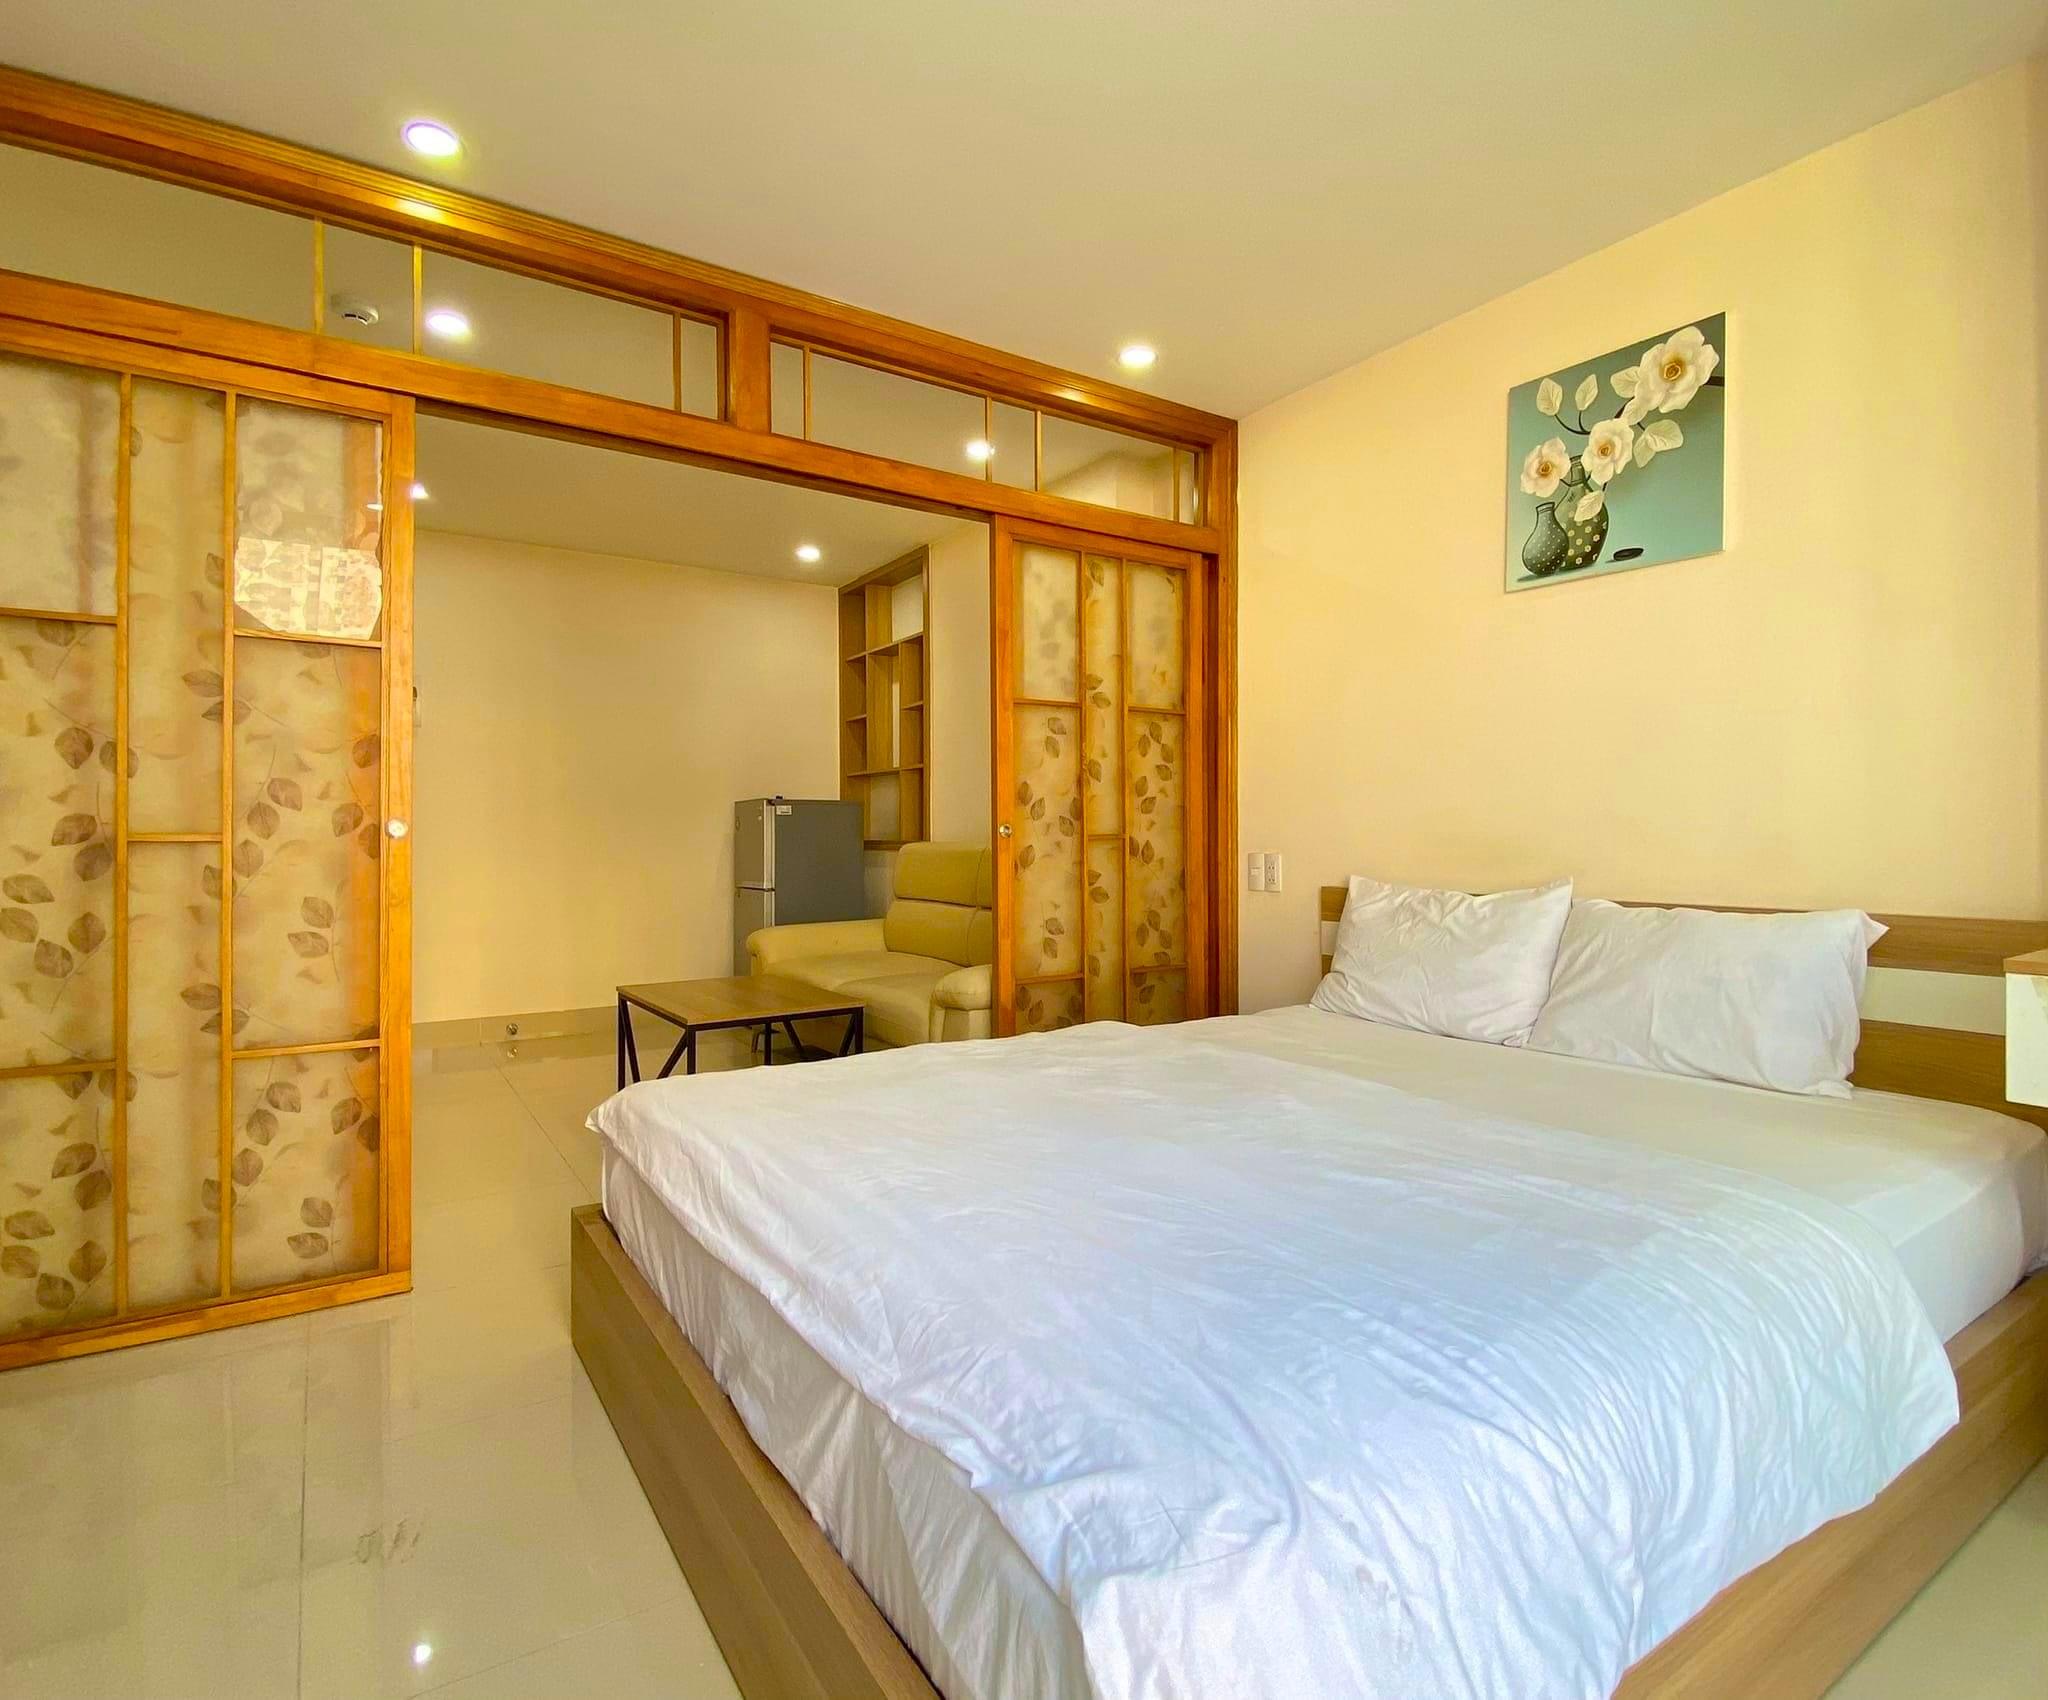 Apartment for buy in An Thuong area